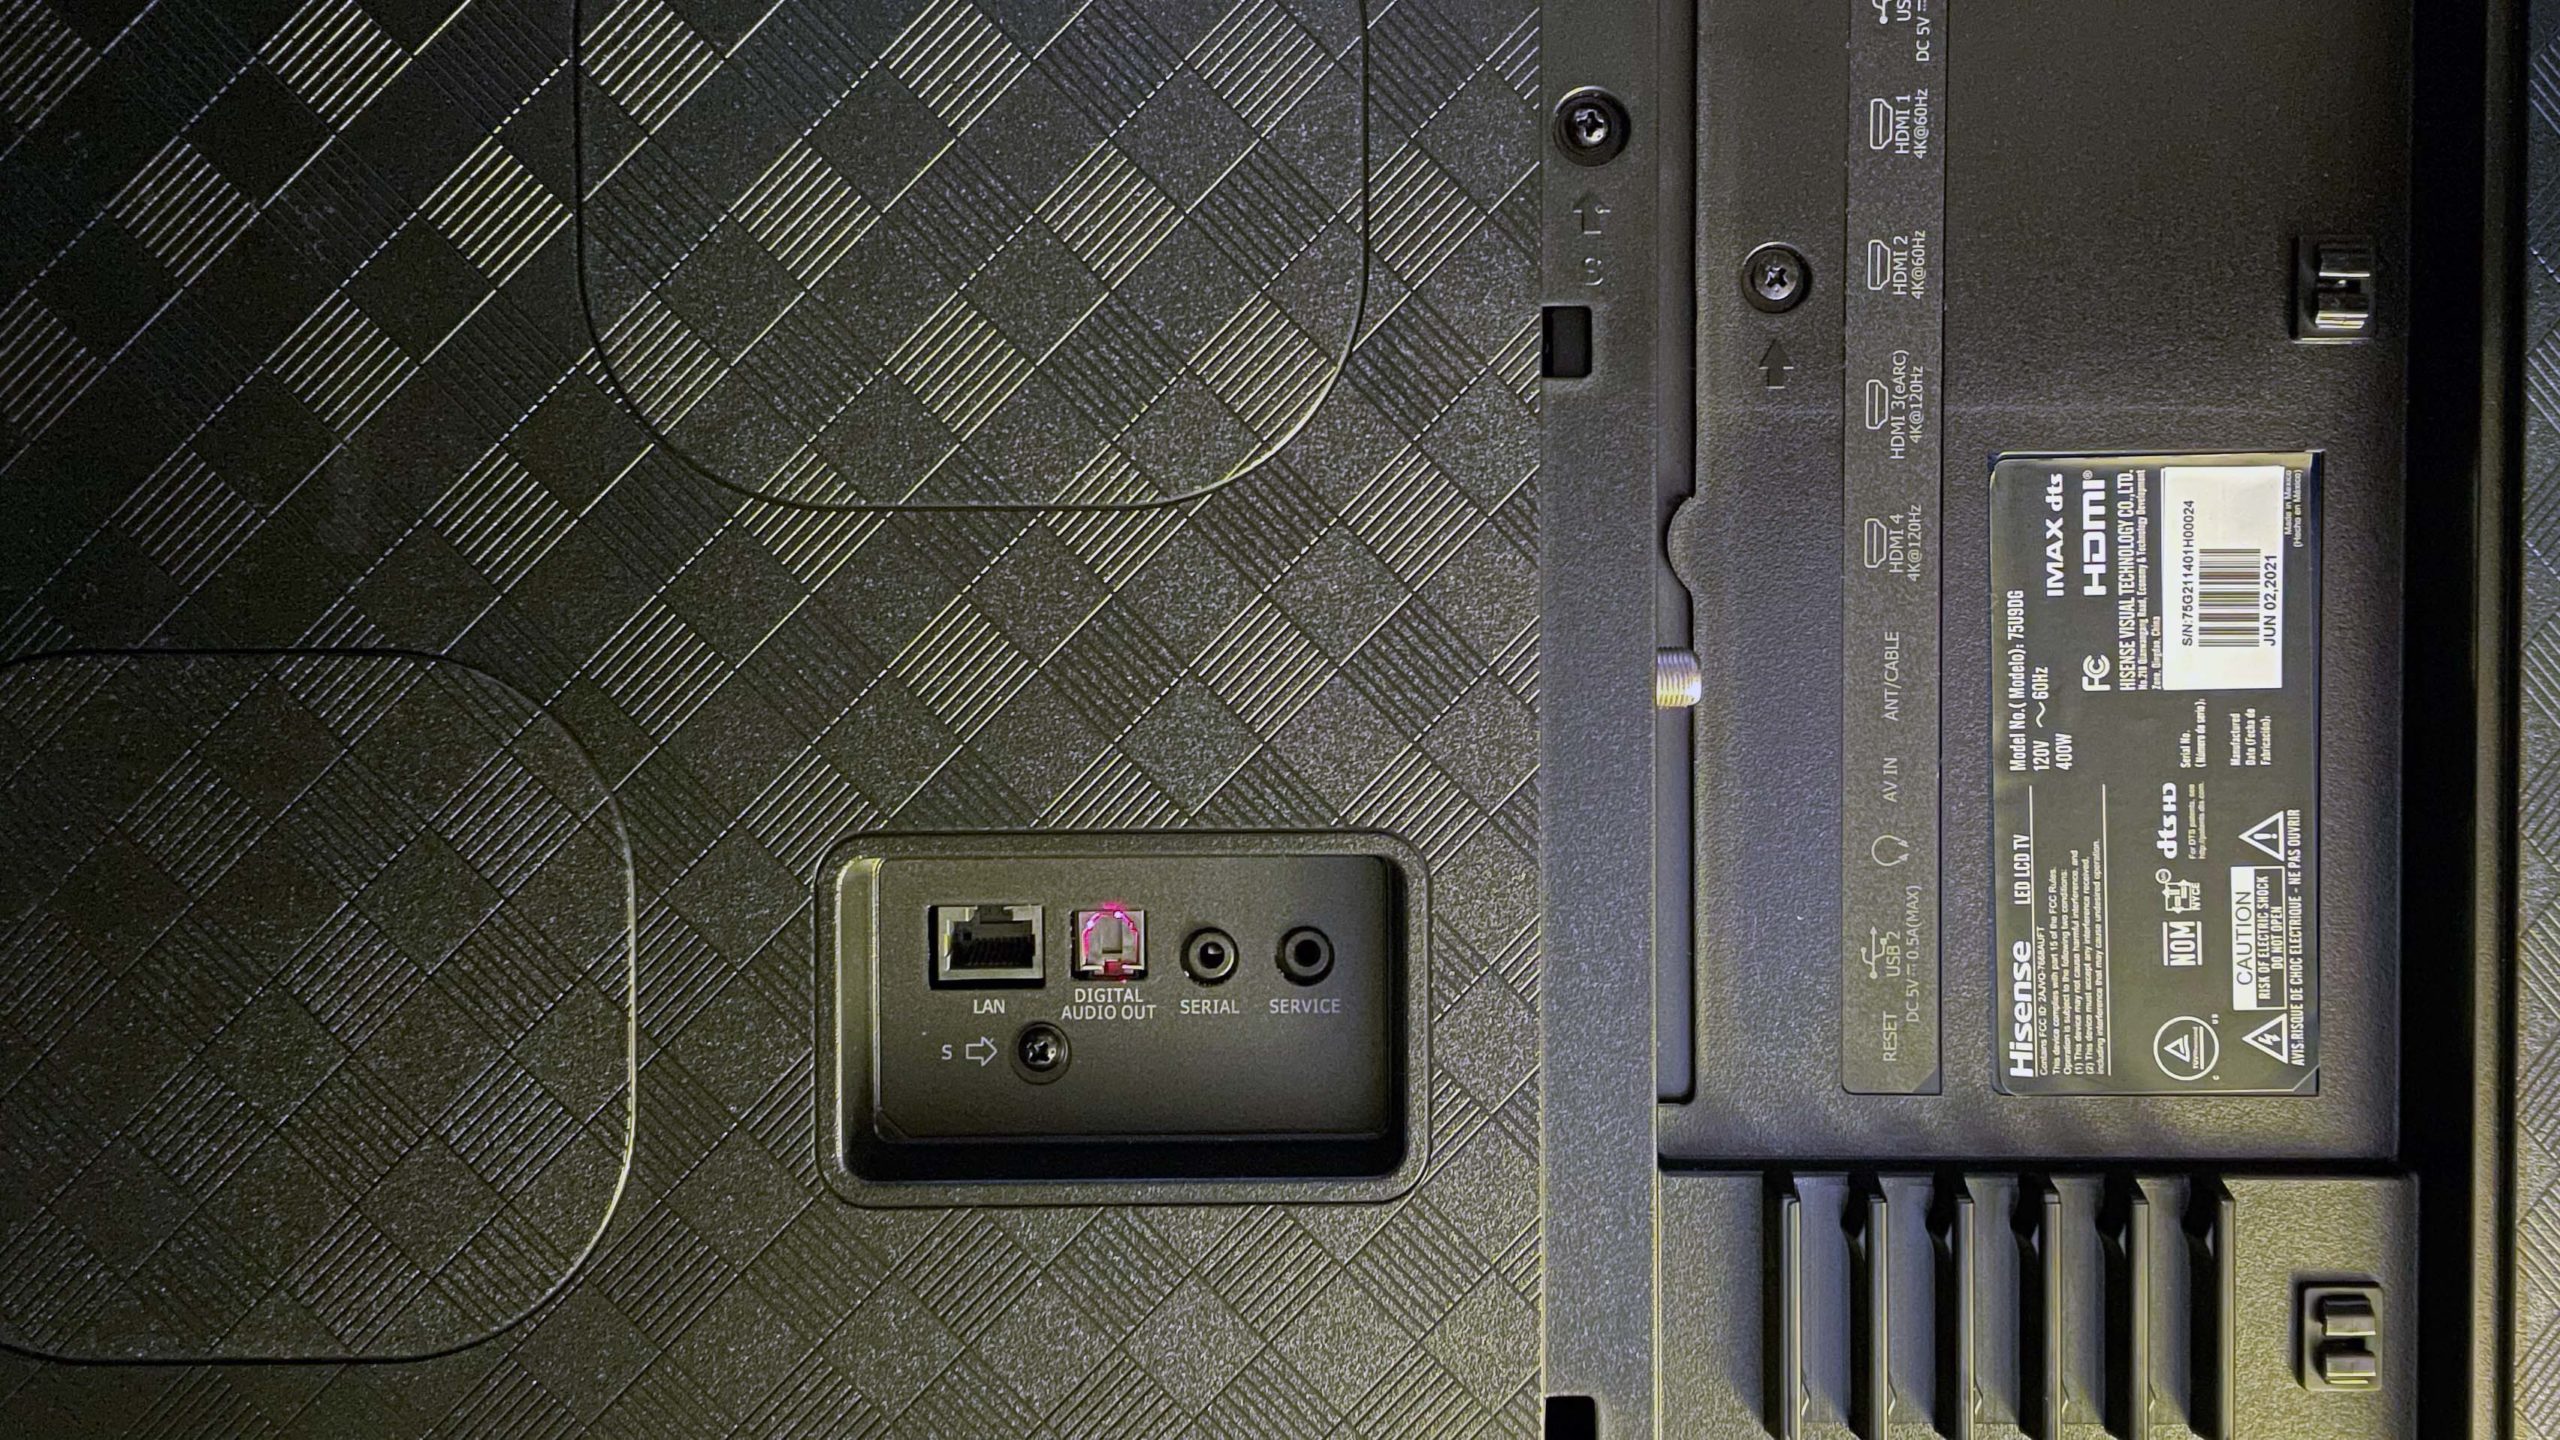 The pattern on the back of the TV, and, of course, ports. (Photo: Wes Davis/Gizmodo)